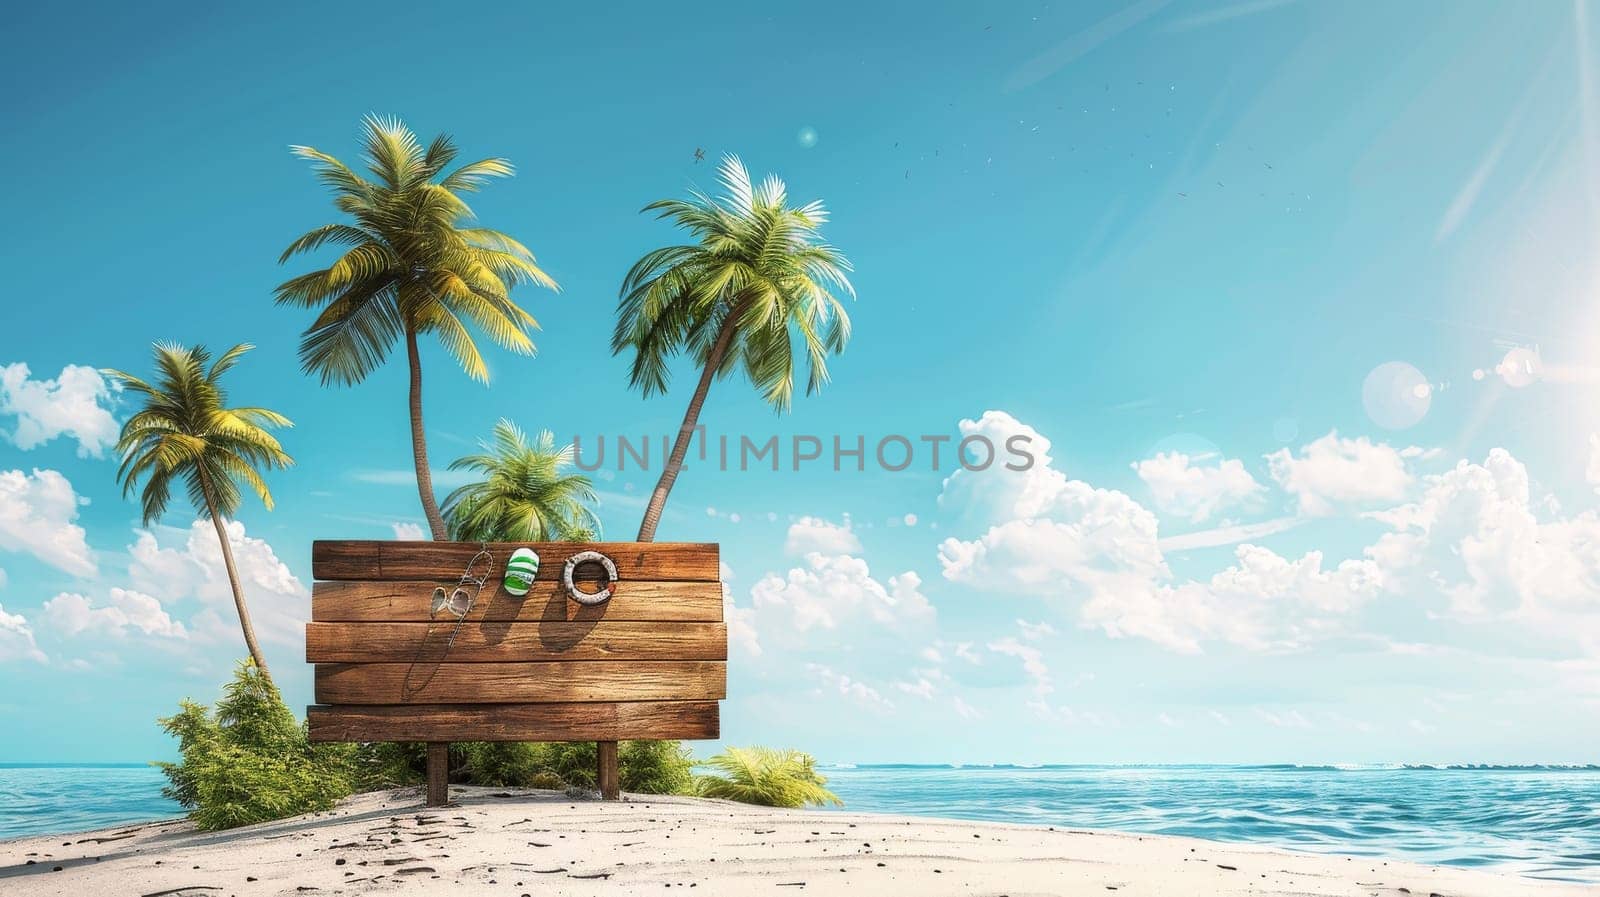 A signboard is placed on a beach next to a palm tree. The signboard is wooden and has a message on it. The beach is calm and peaceful, with the palm tree providing shade and a sense of relaxation